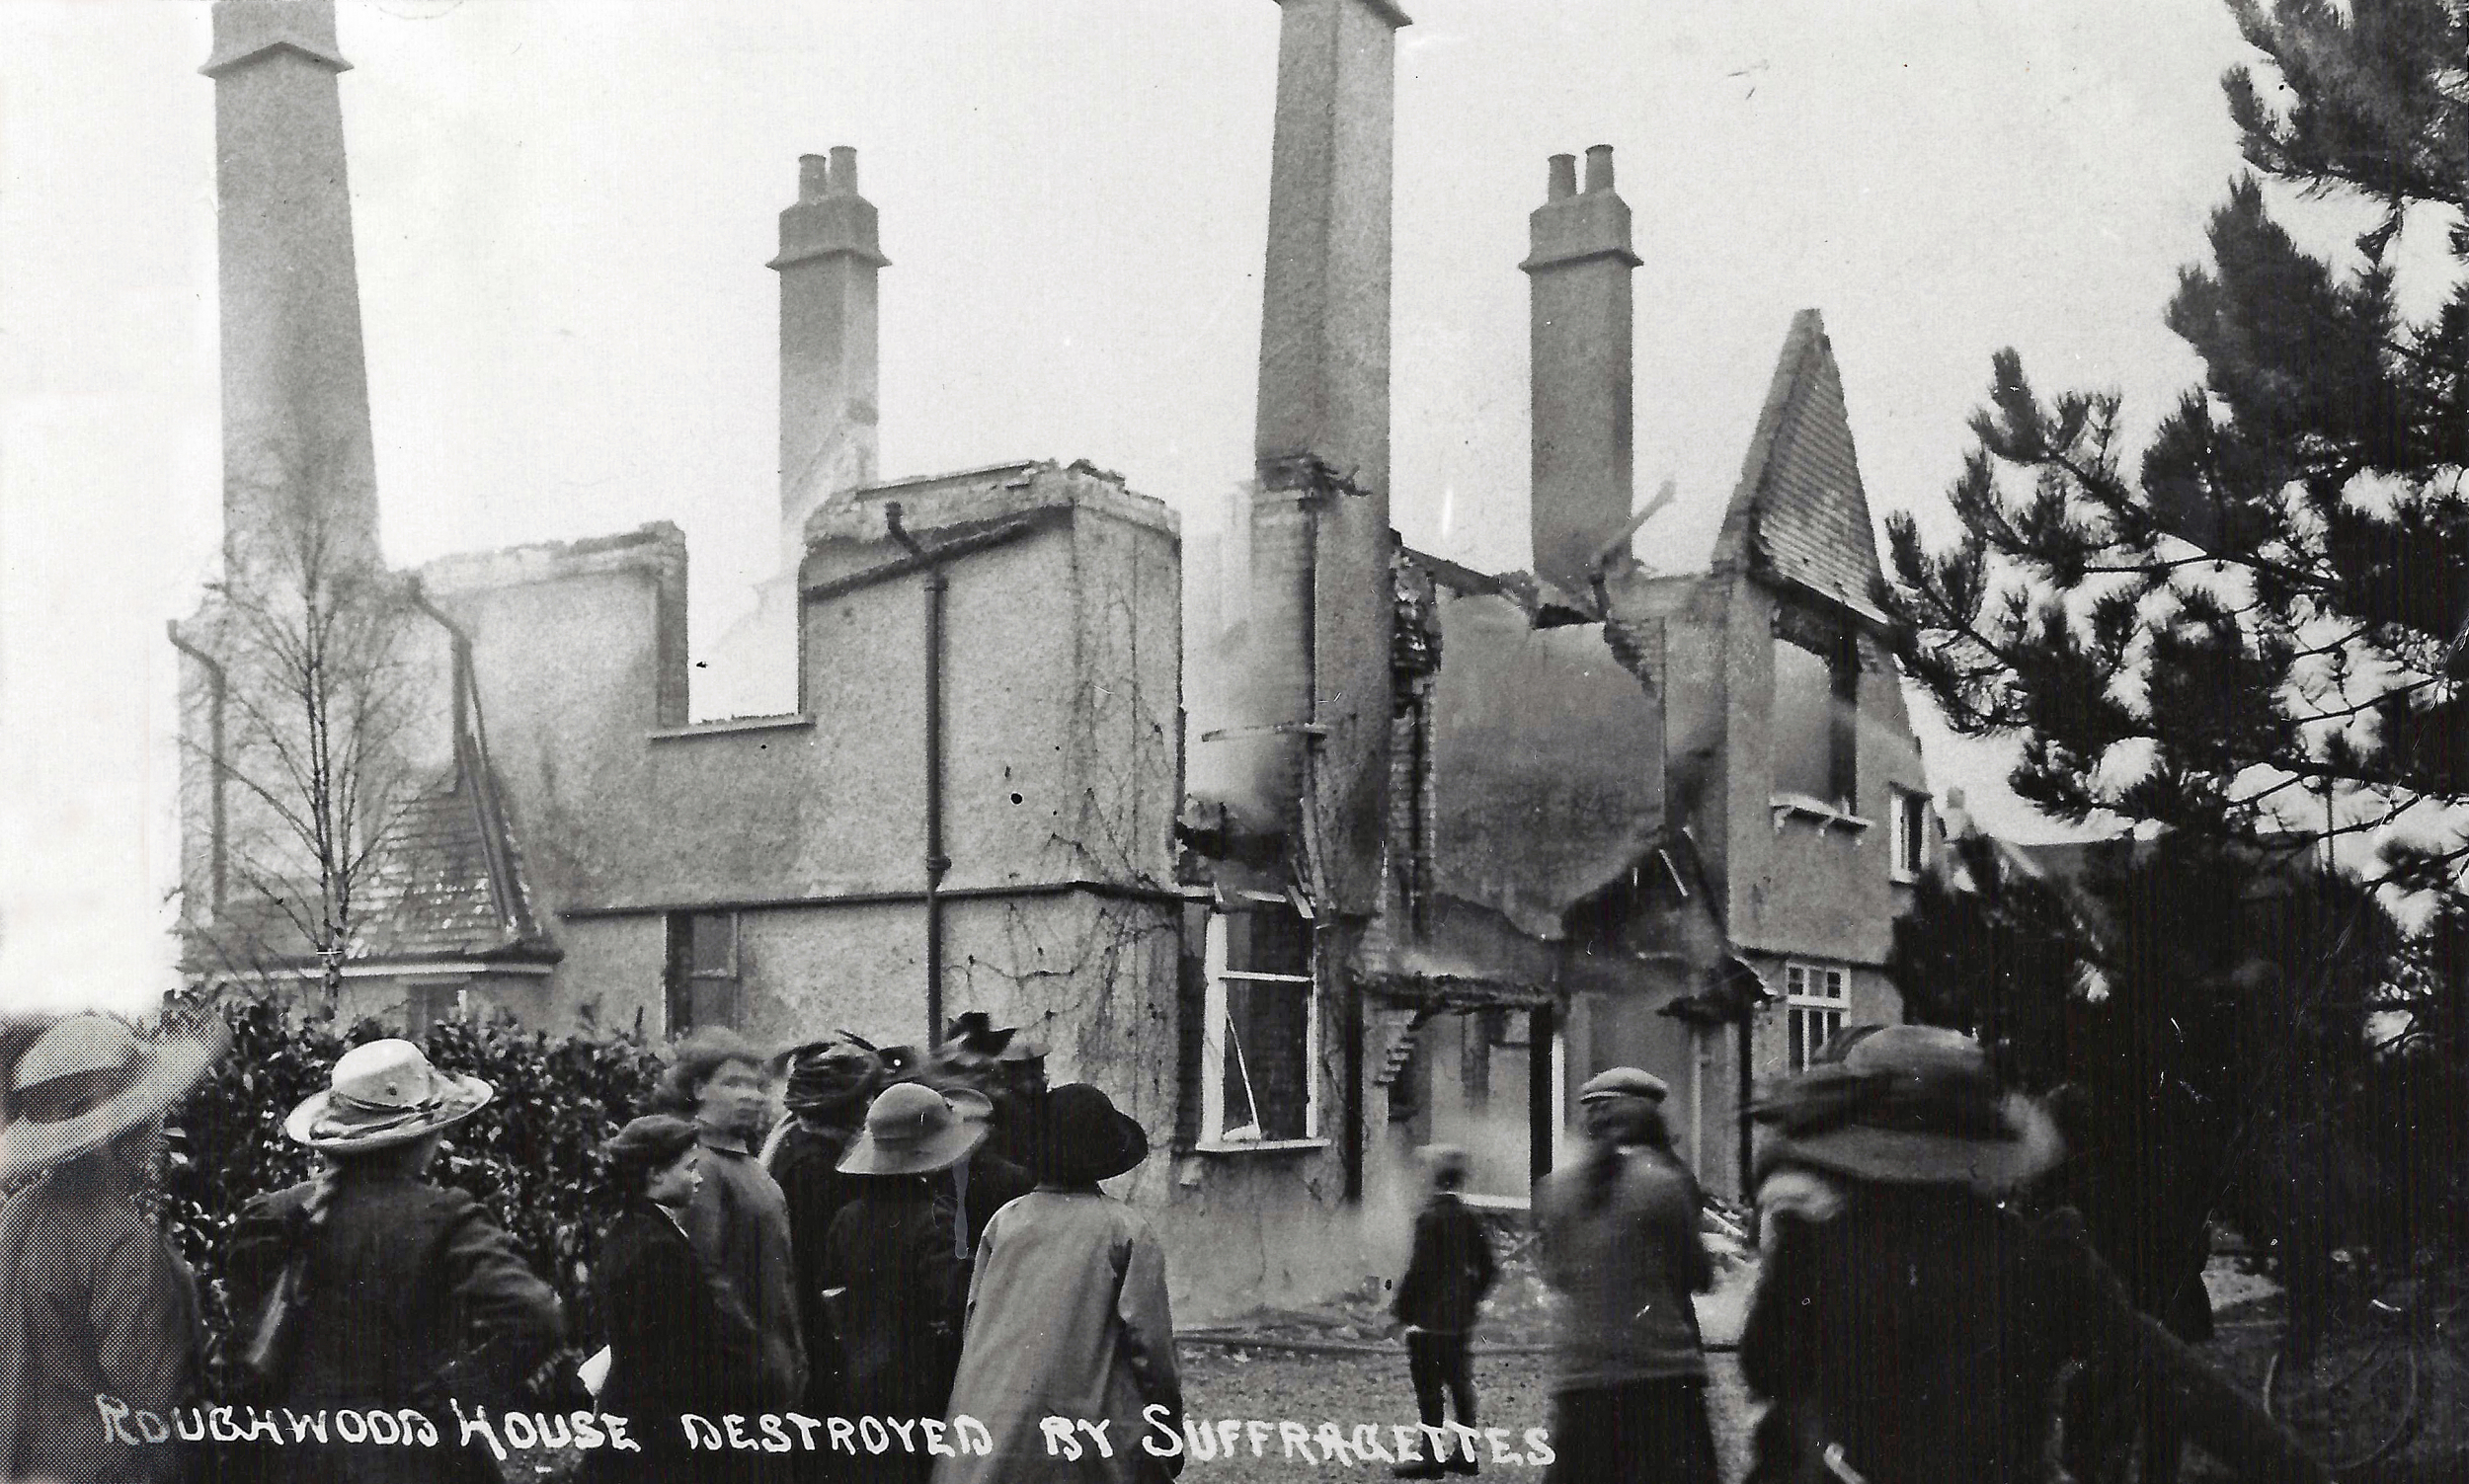 Roughwood House, burnt down by suffragettes, 1911 aa